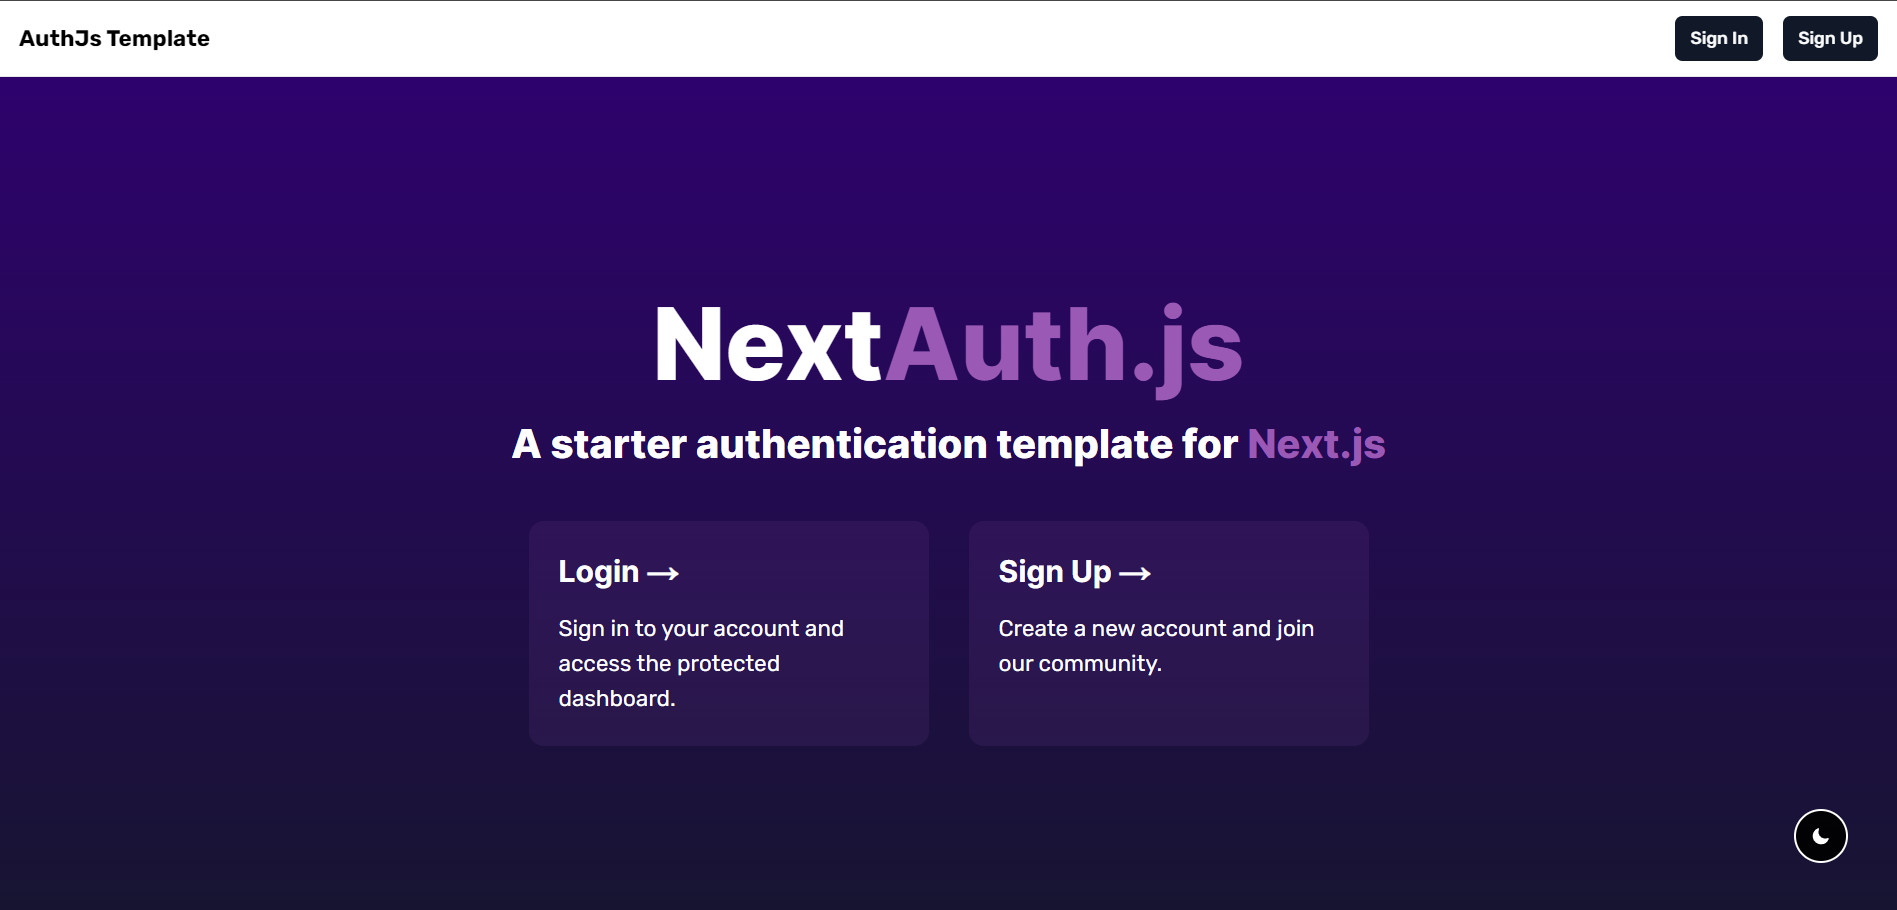 AuthJs Template: A developer-friendly solution for secure authentication in Next.js applications.